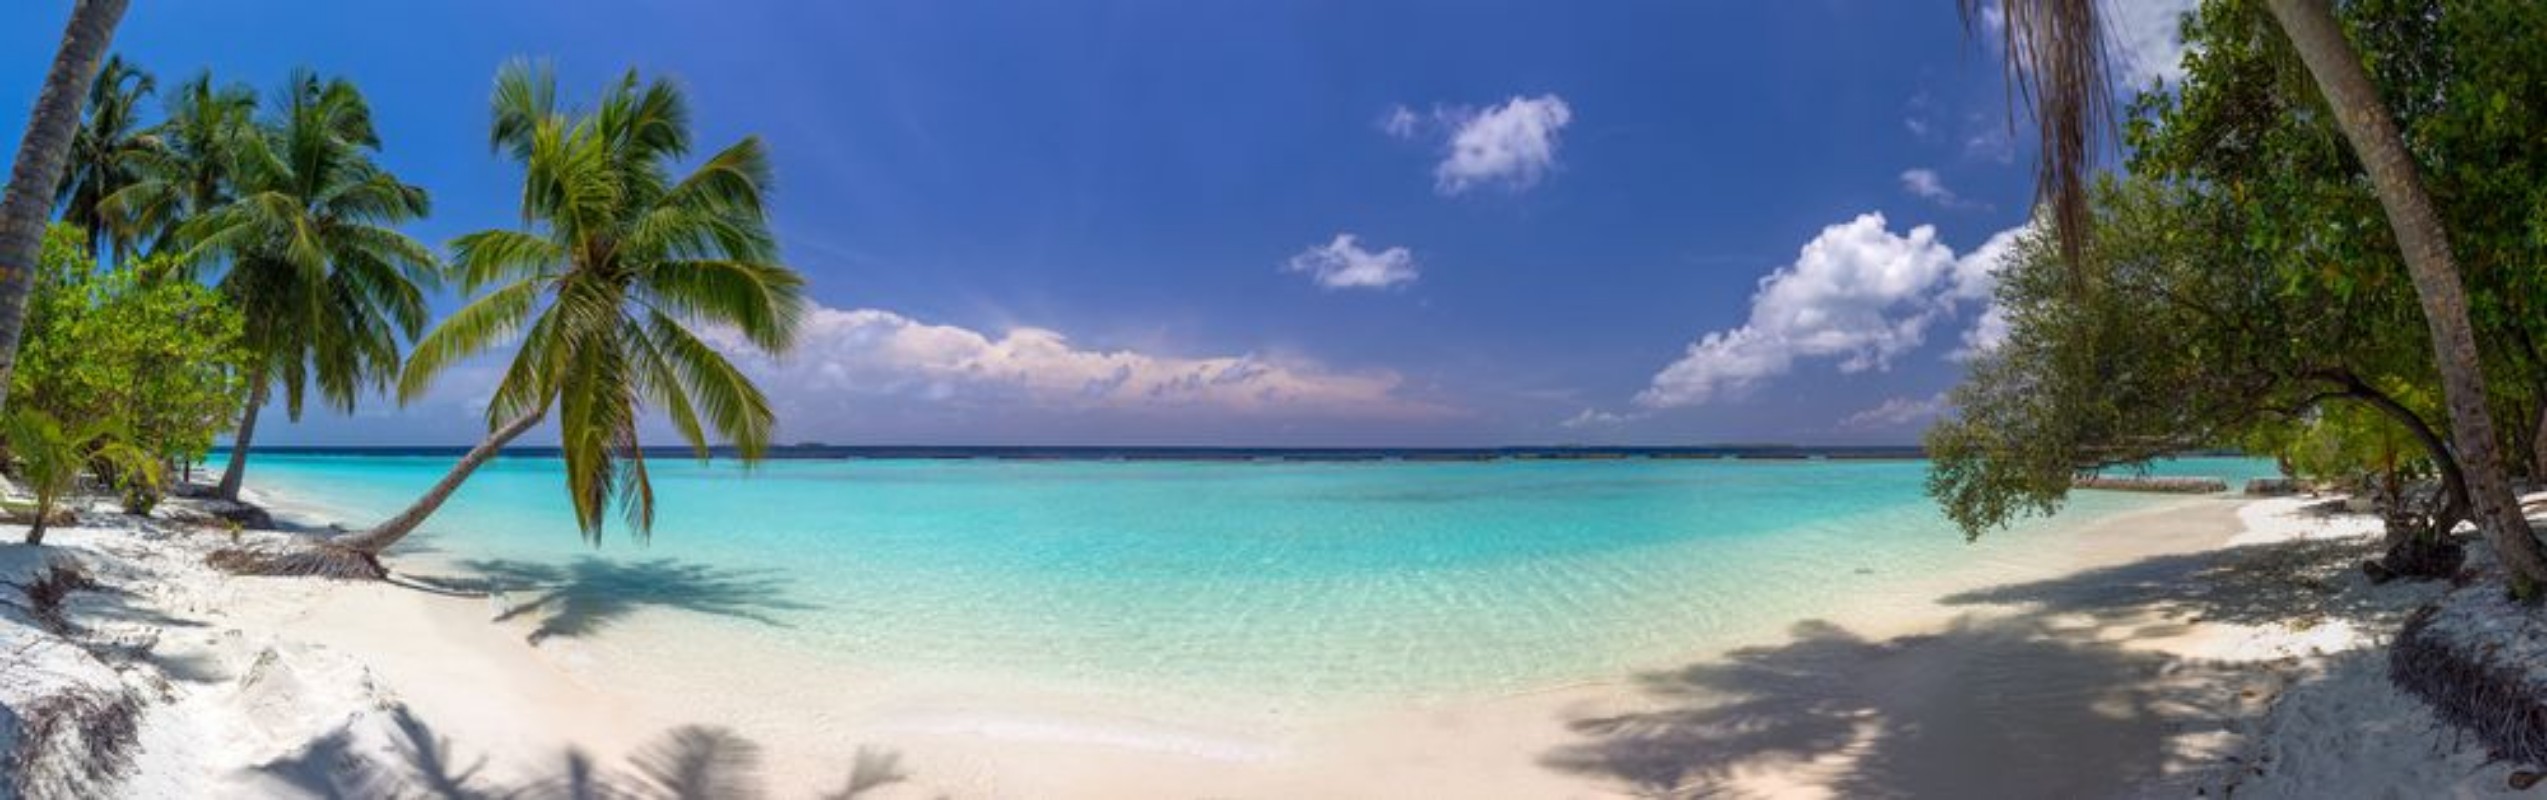 Image de Beach panorama at Maldives with blue sky palm trees and turquoi